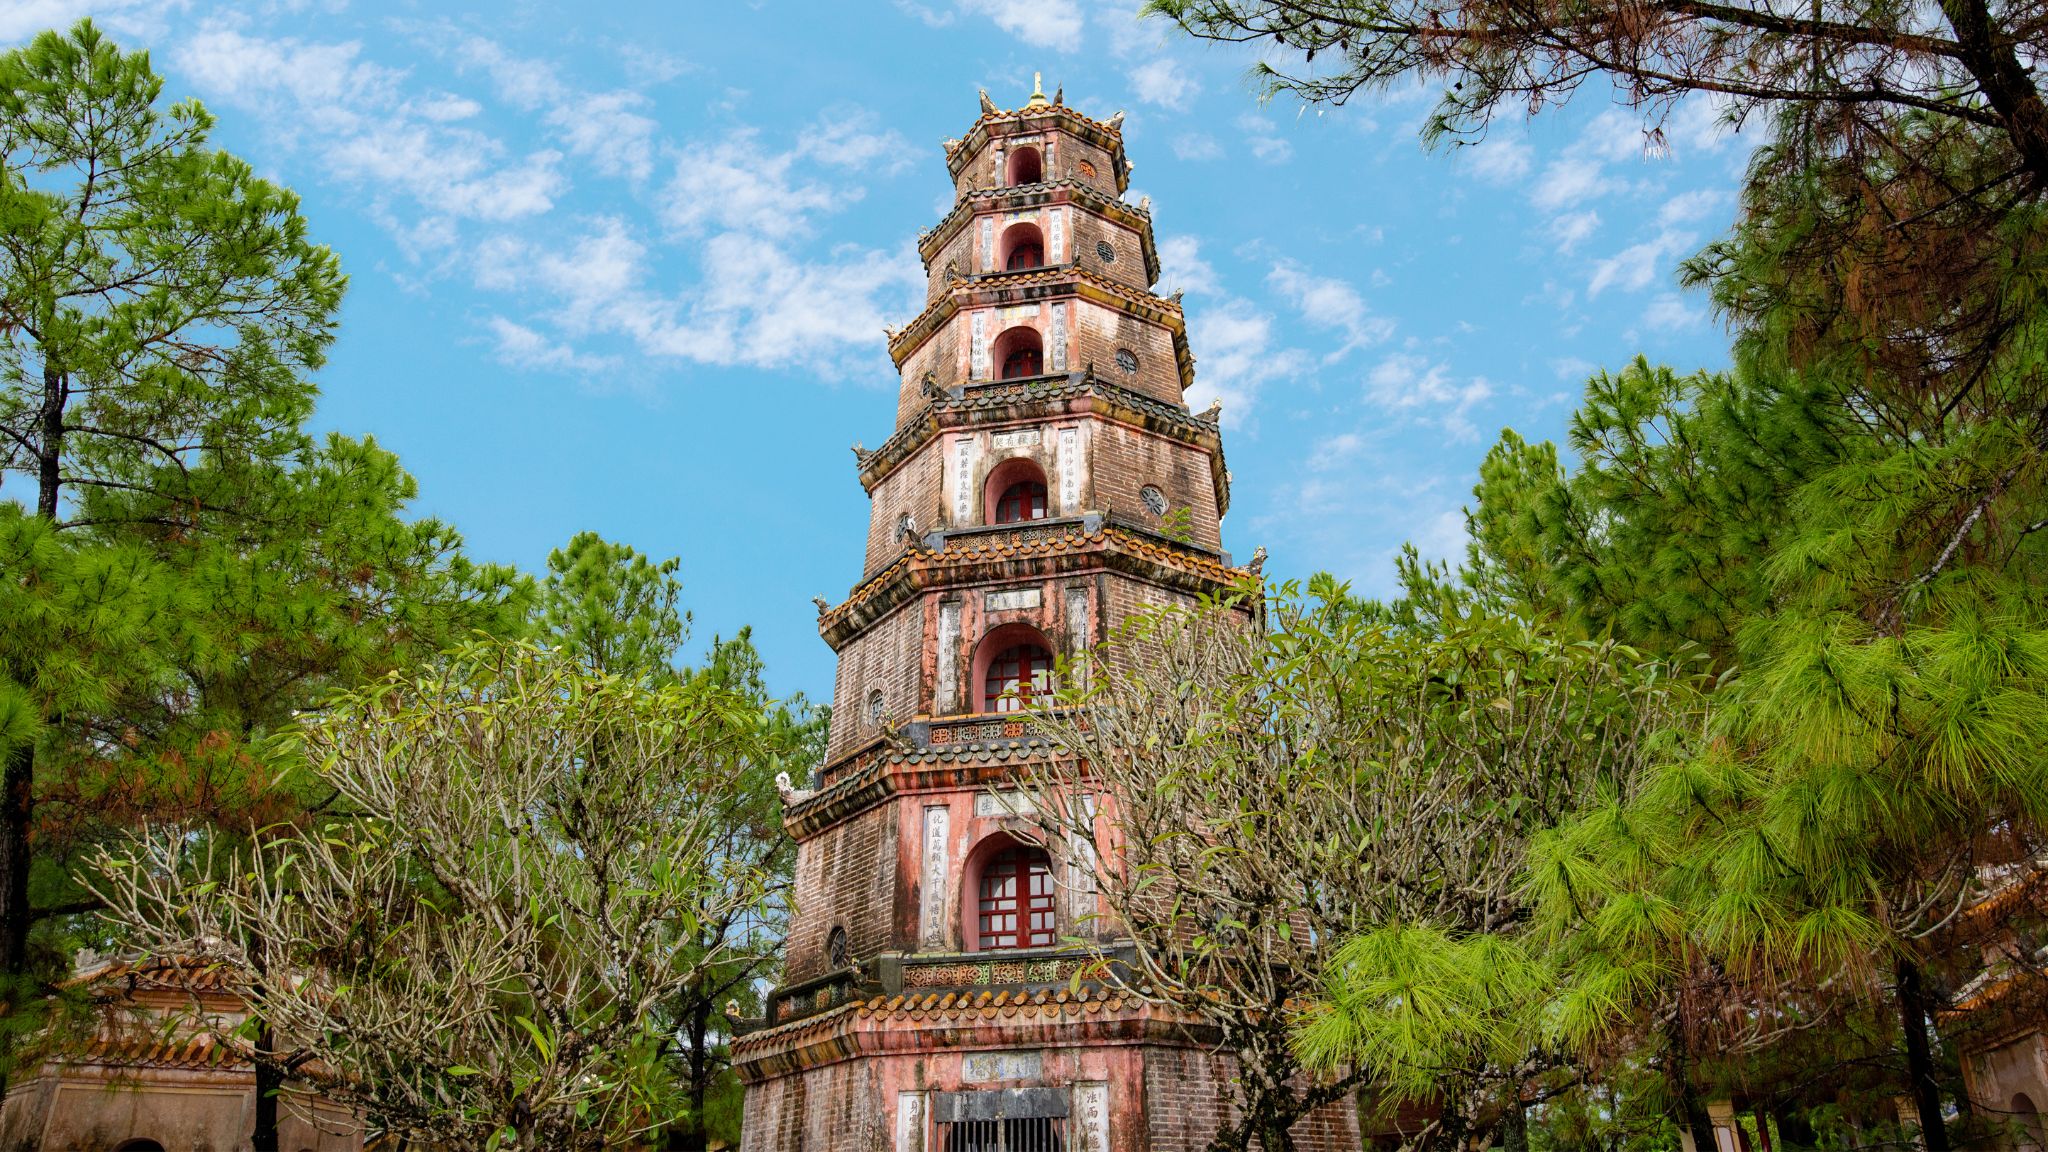 Day 5 The Remarkable Architectural Design Of Thien Mu Pagoda